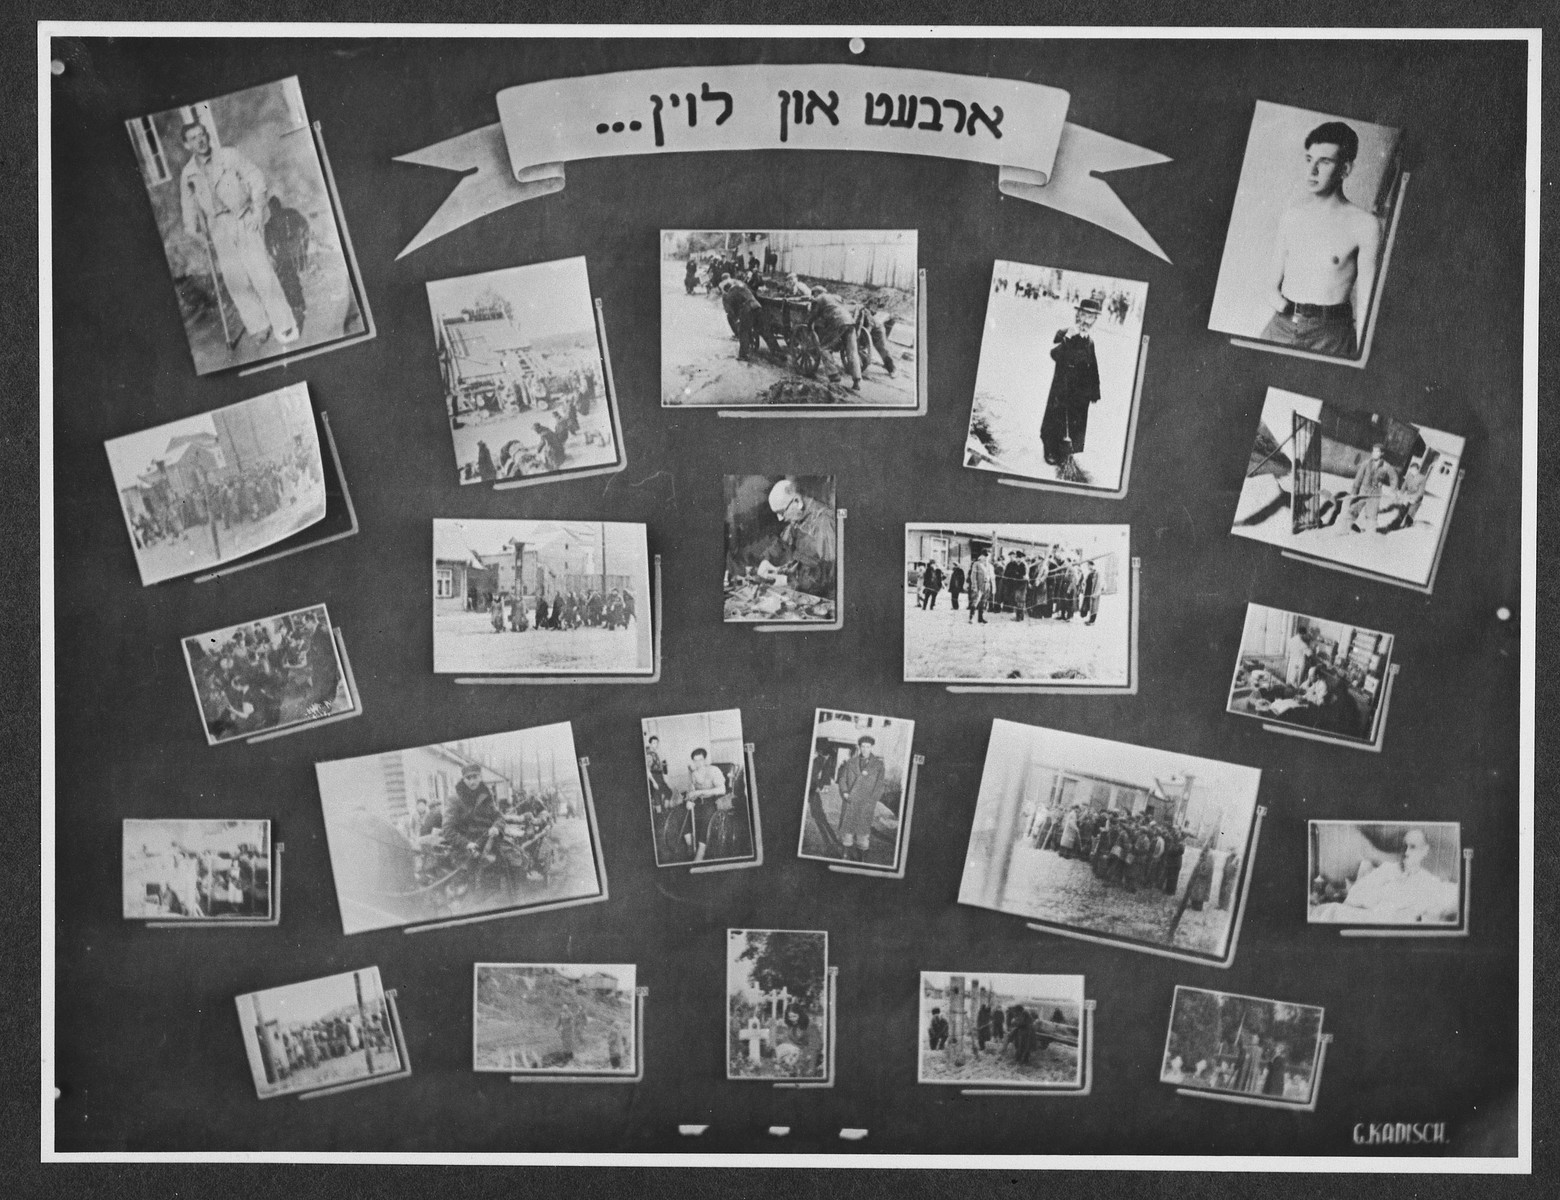 Display panel from a photo exhibition on the Holocaust entitled, "Work And Wages..." created by photographer George Kaddishin a displaced persons' camp.

The exhibition consisted both of photographs that he shot in the Kovno ghetto as well as other photographs he collected from other ghettos and camps.